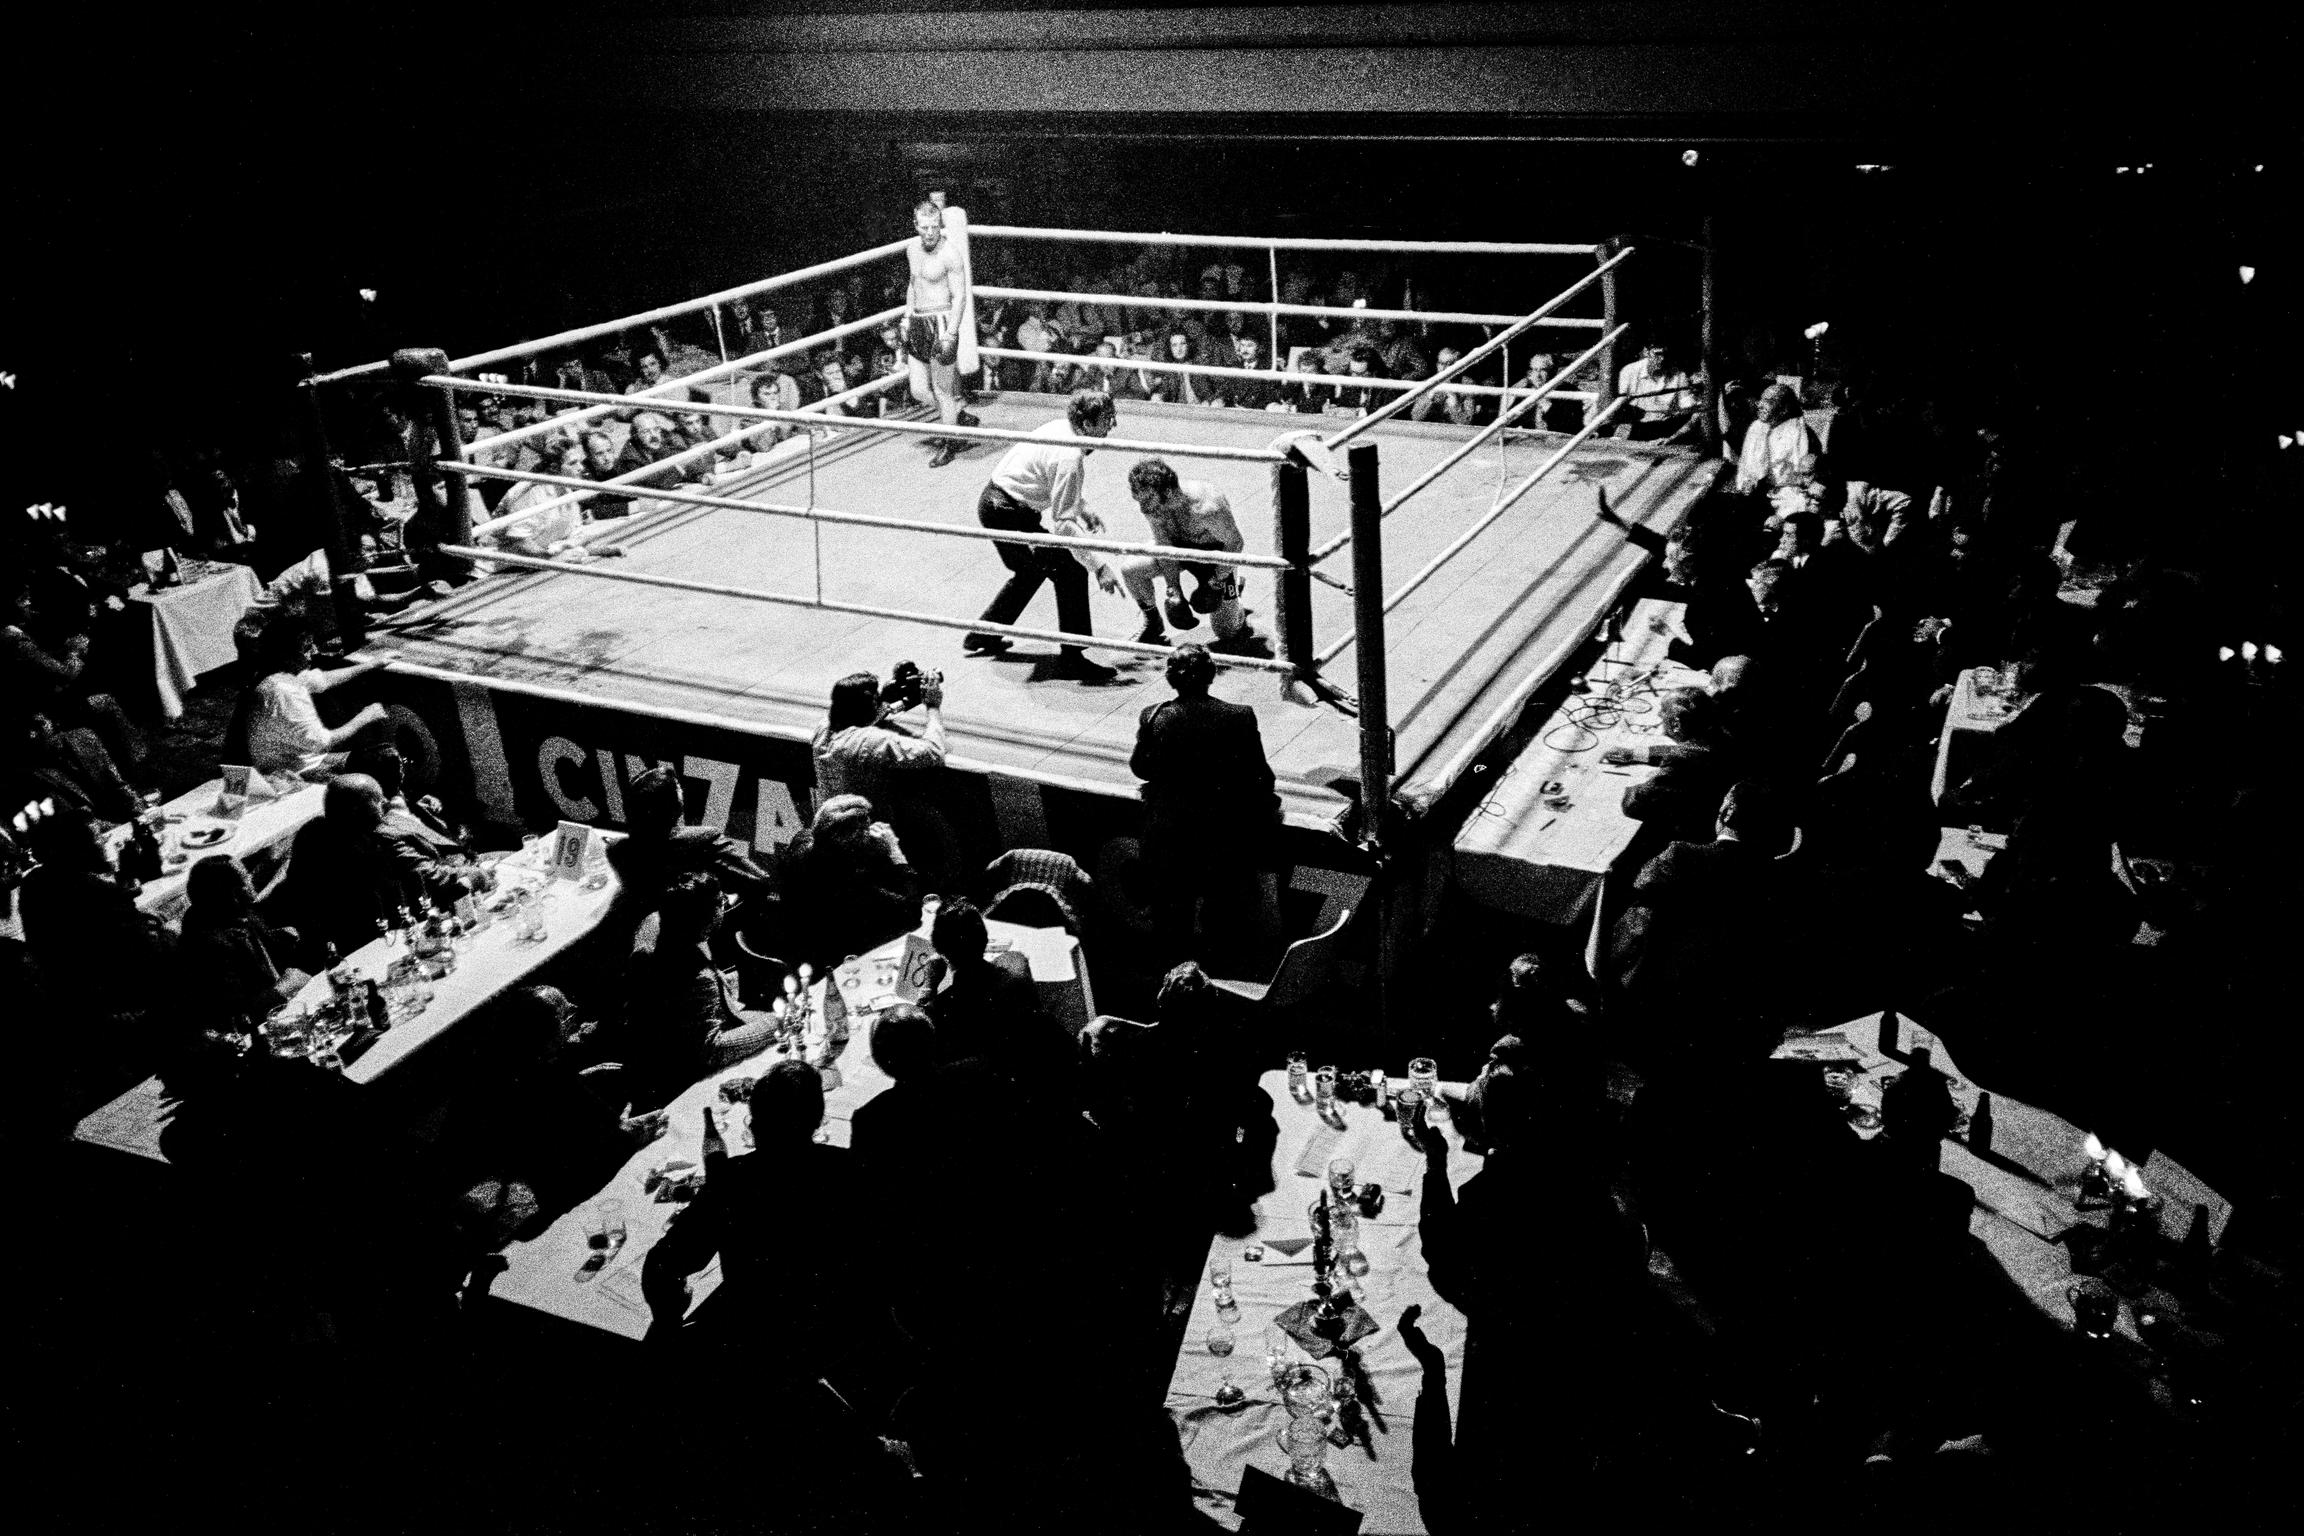 Private dinner boxing. Top Rank Suite. Swansea, Wales